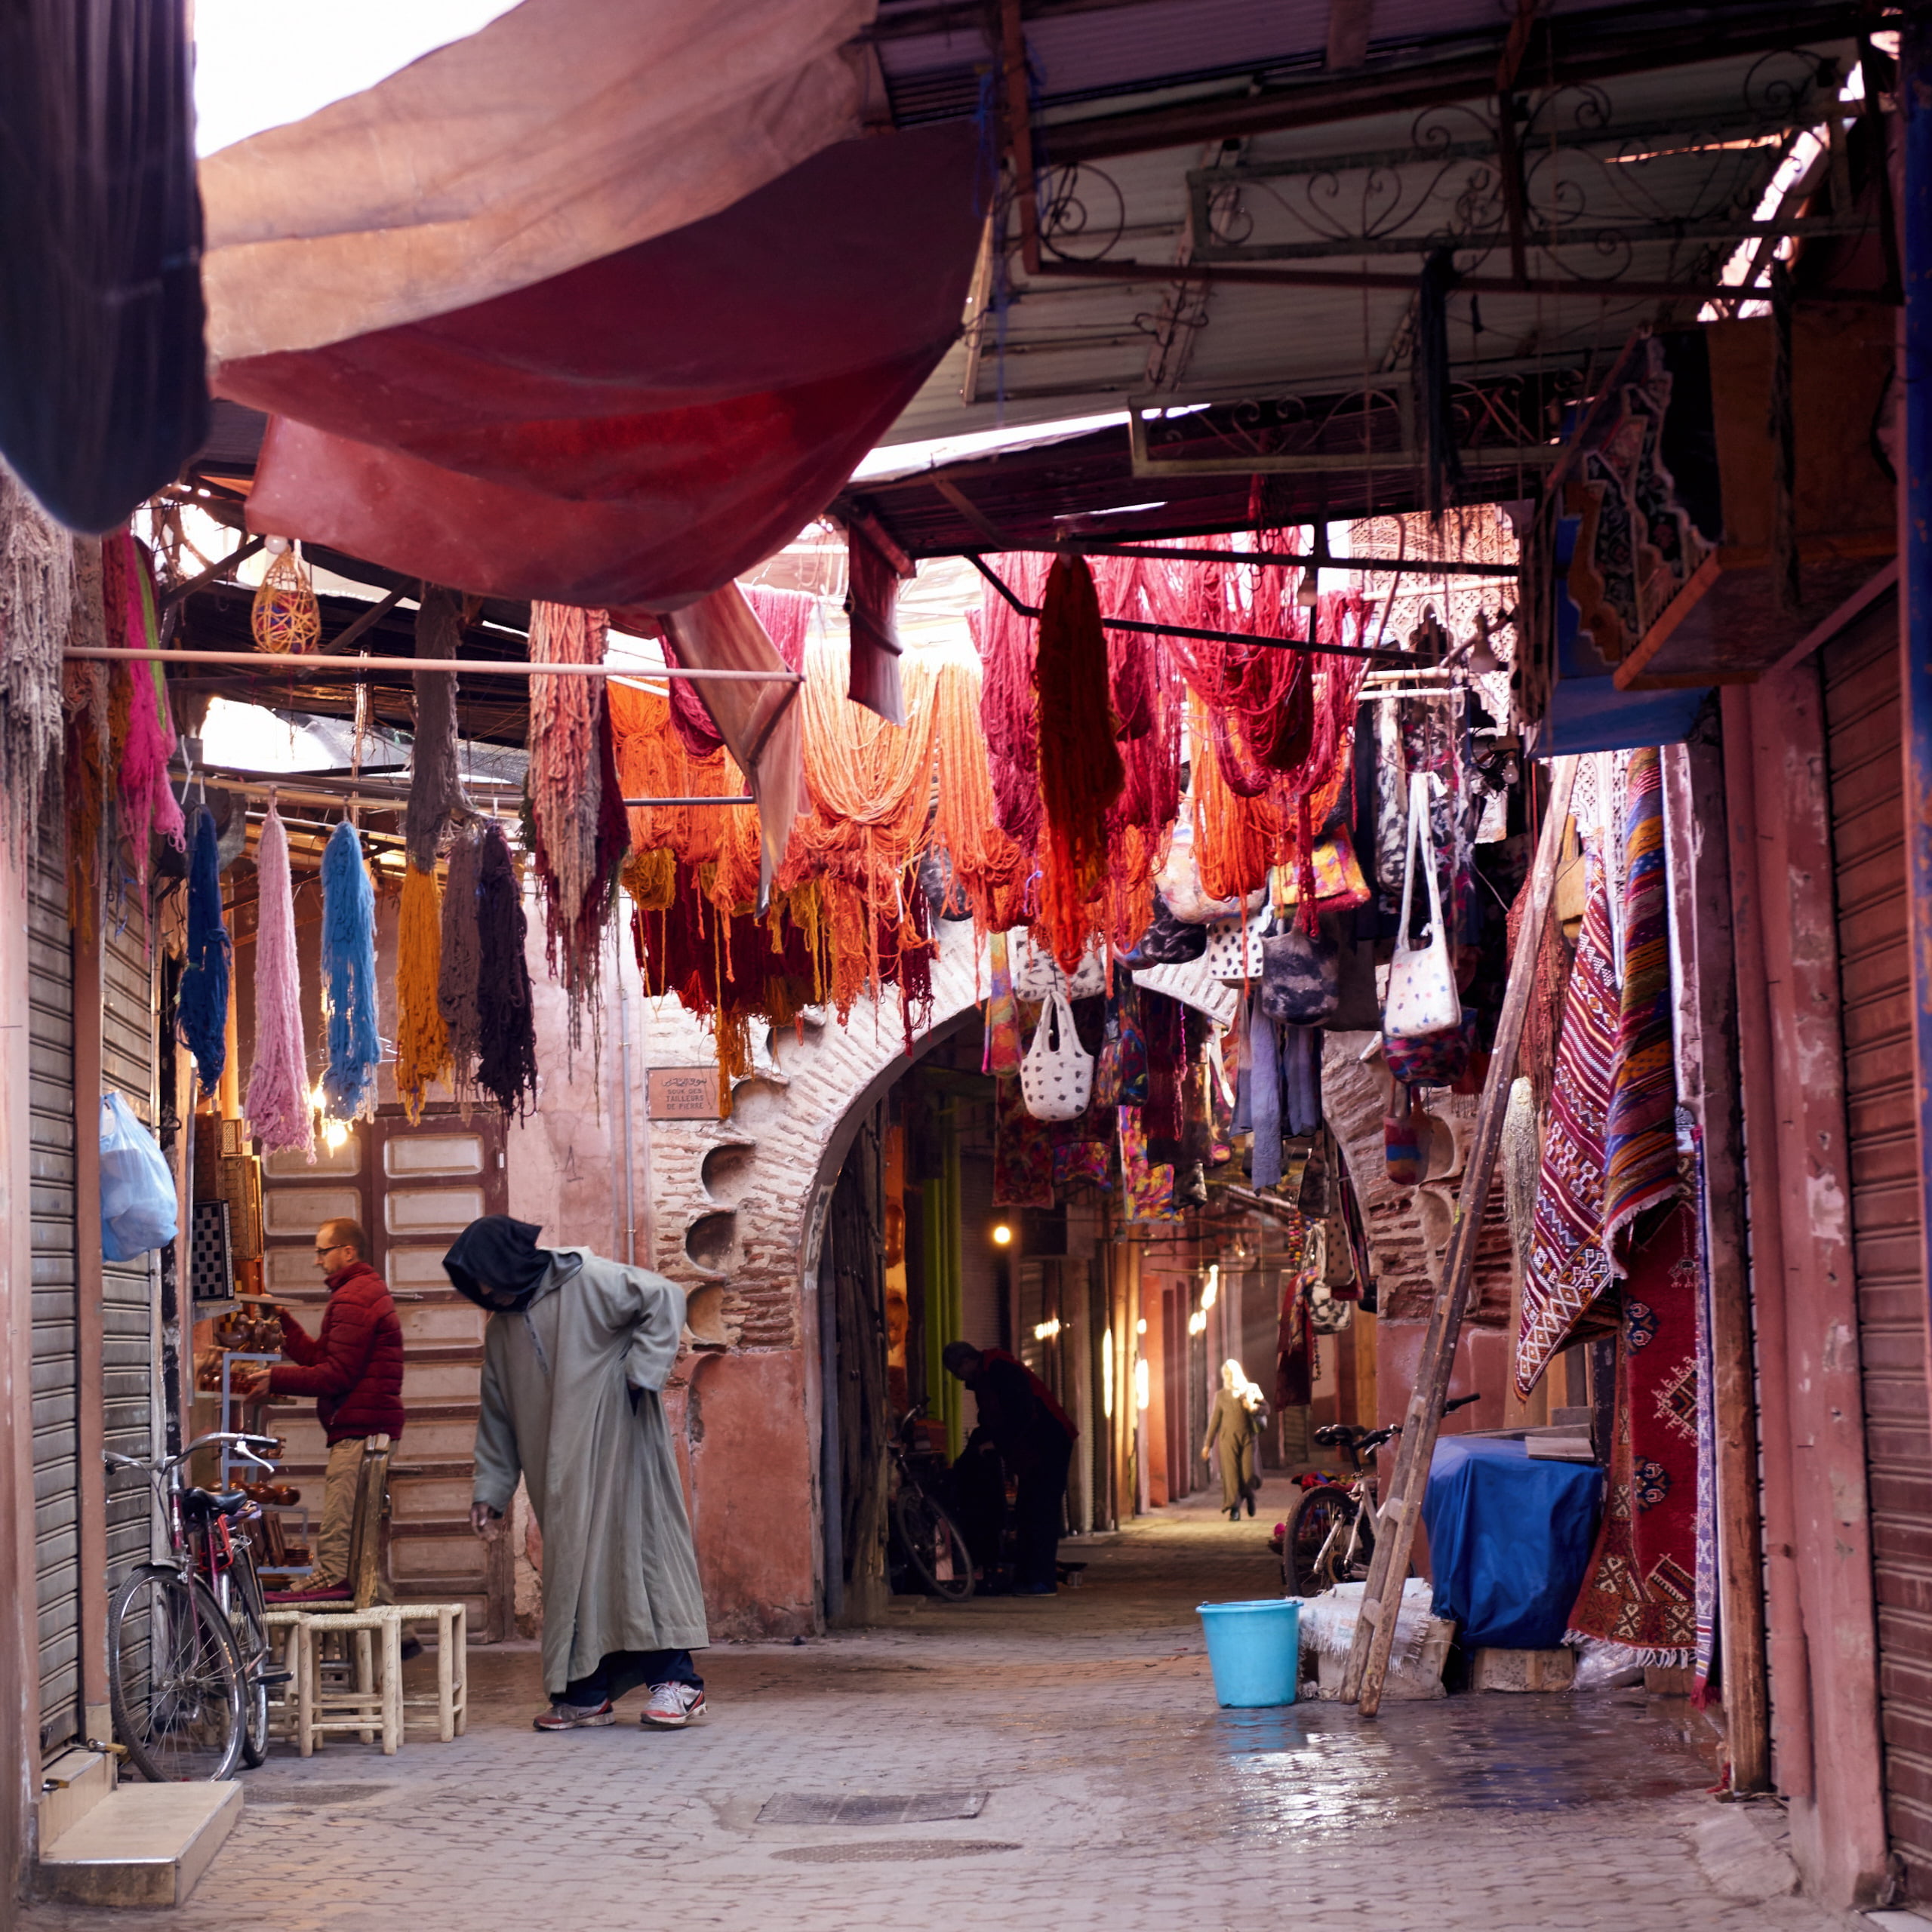 Your guide to the souk in marrakech